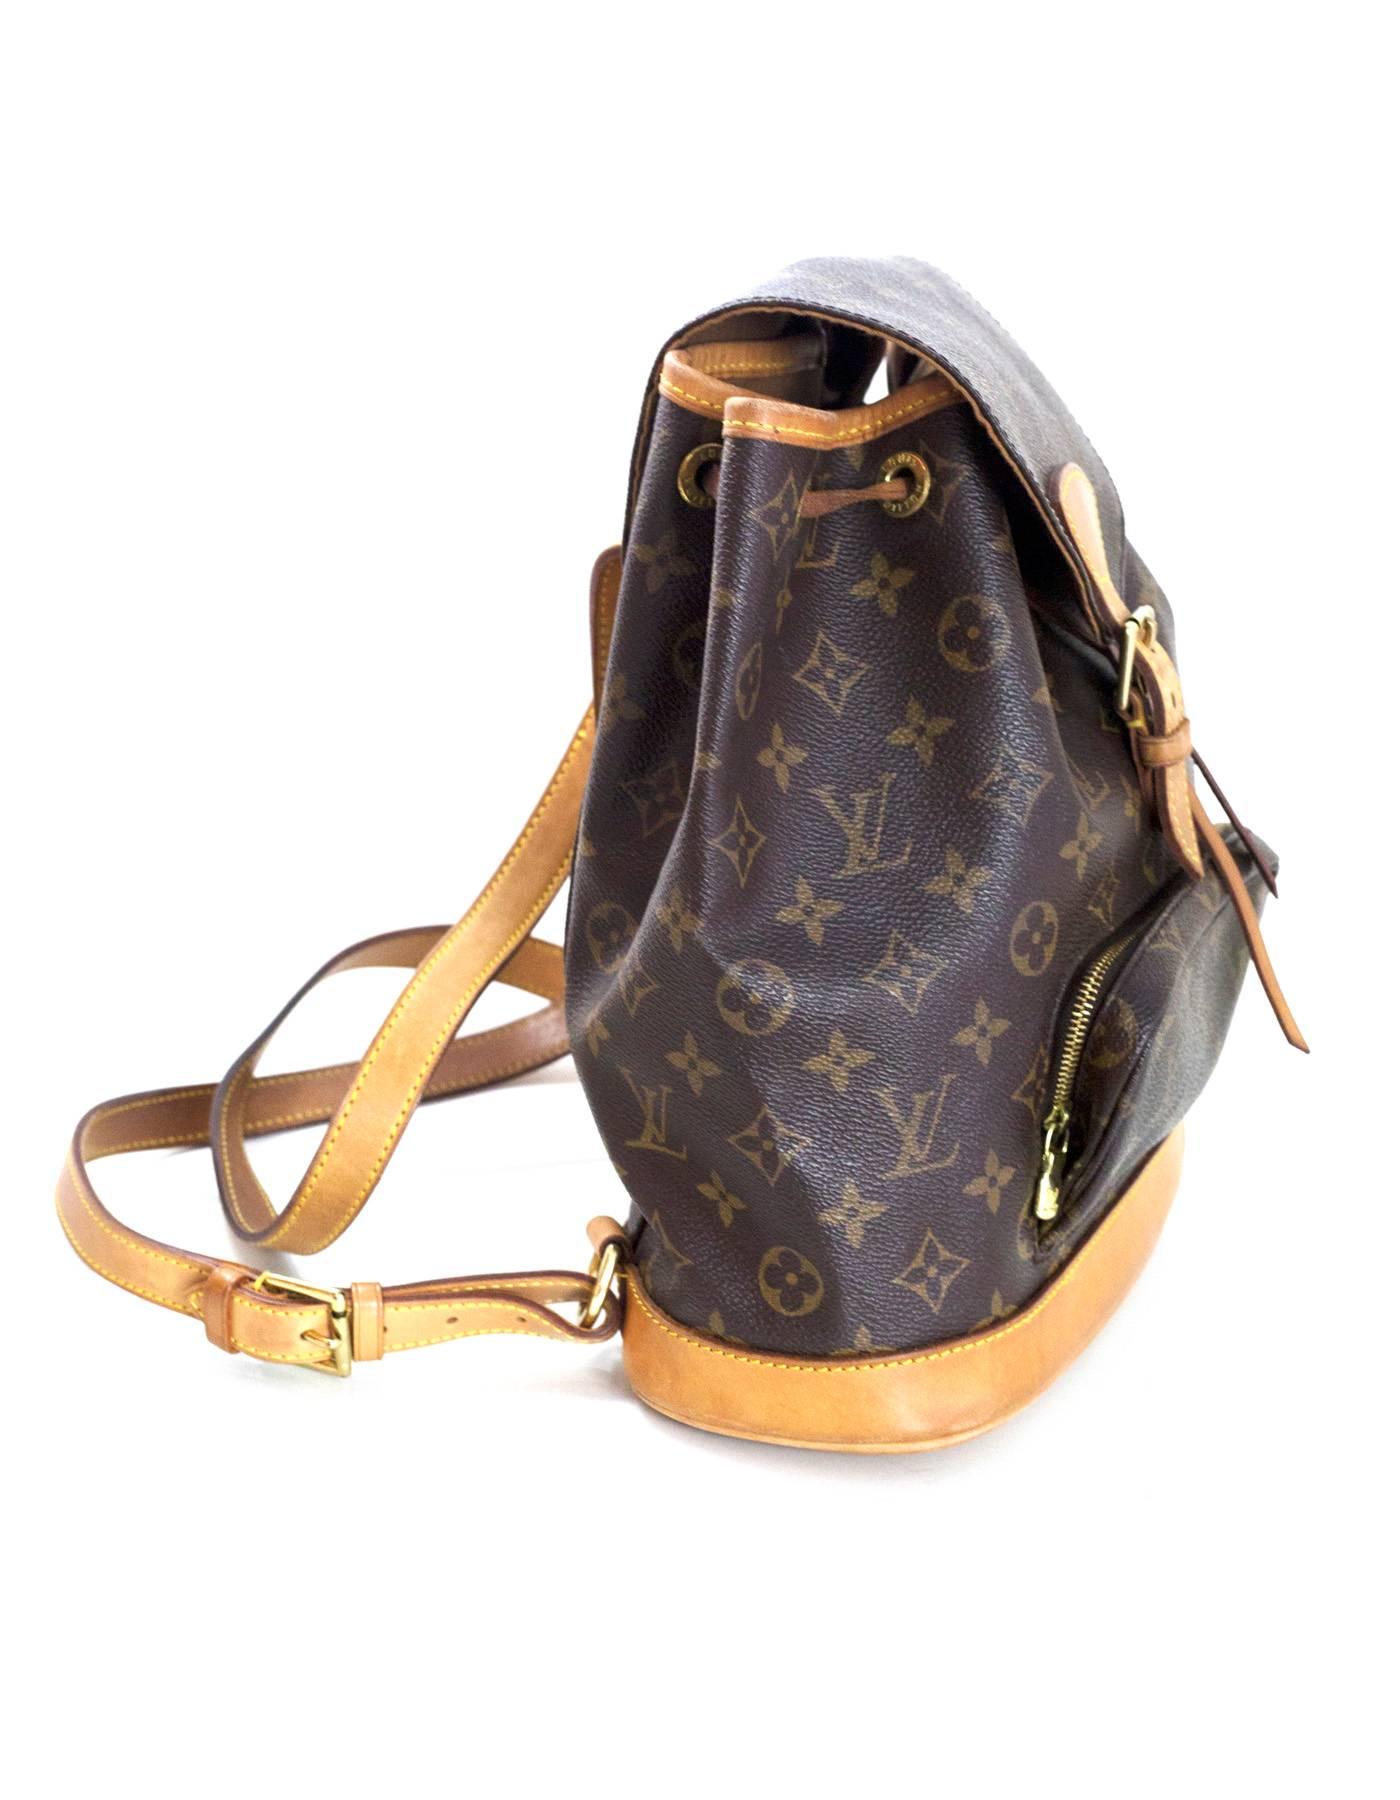 Louis Vuitton Monogram Montsouris MM Backpack
Features leather trim throughout and adjustable shoulder straps

Made In: France
Year of Production: 2001
Color: Brown
Hardware: Goldtone
Materials: Leather and coated canvas
Lining: Brown